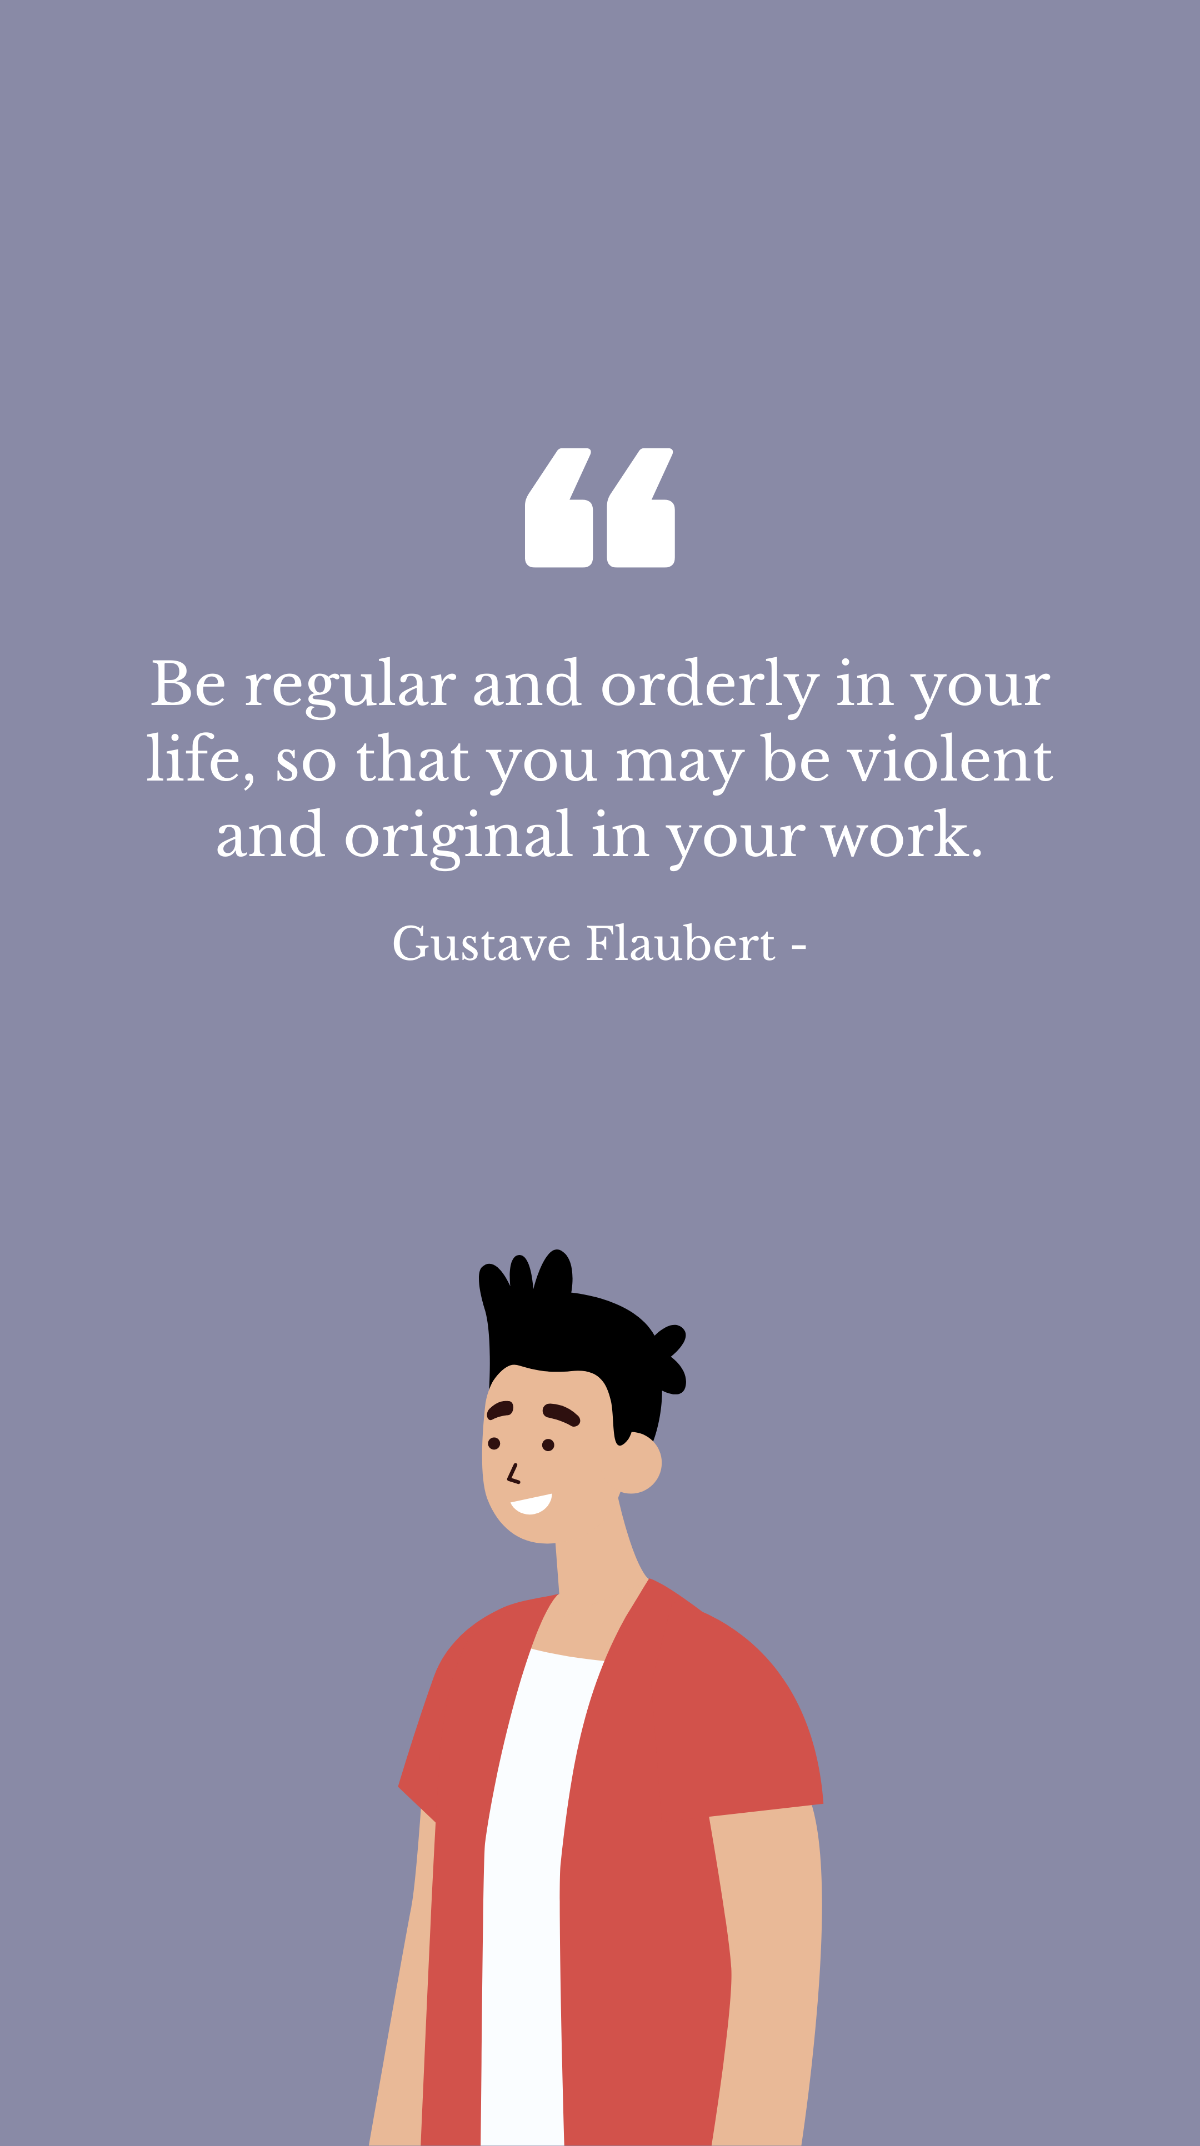 Free Gustave Flaubert - Be regular and orderly in your life, so that you may be violent and original in your work. Template